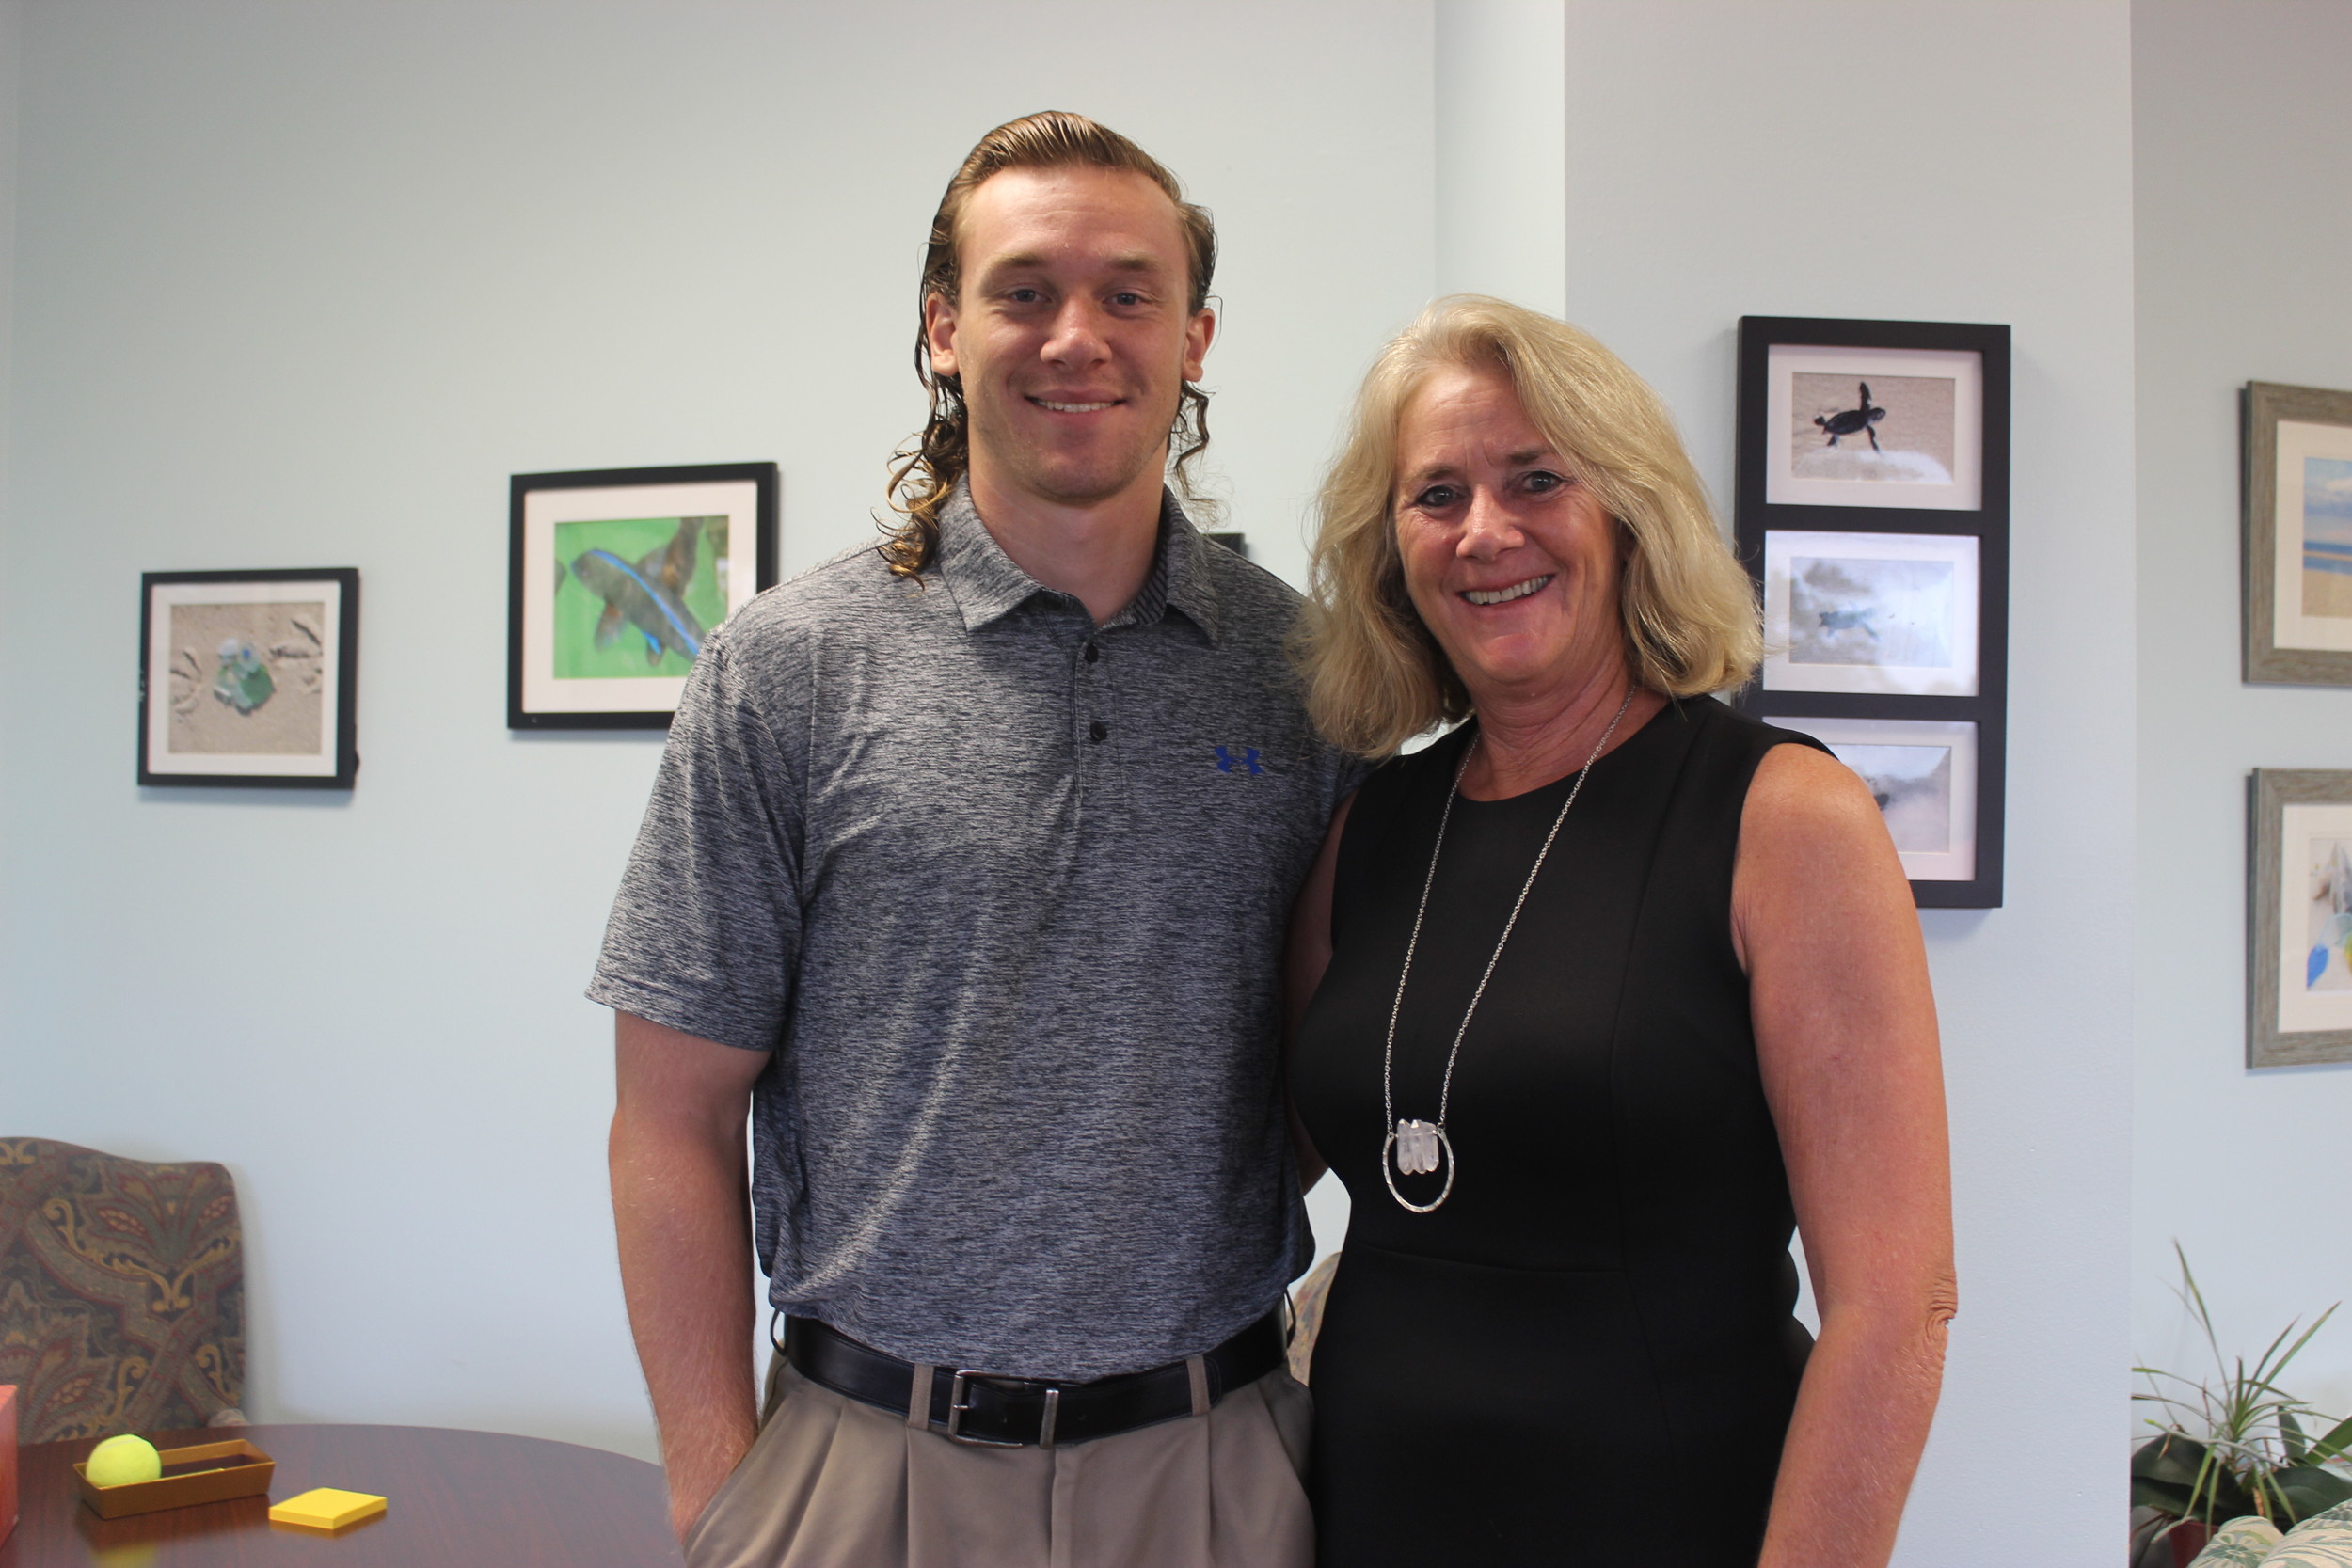 Taylor Rush with his mother, Bolles Lower School Ponte Vedra Beach Campus Head and breast cancer survivor Peggy Campbell-Rush. Rush previously donated his hair to an organization that makes wigs for cancer patients and is growing his hair out again to donate a second time.